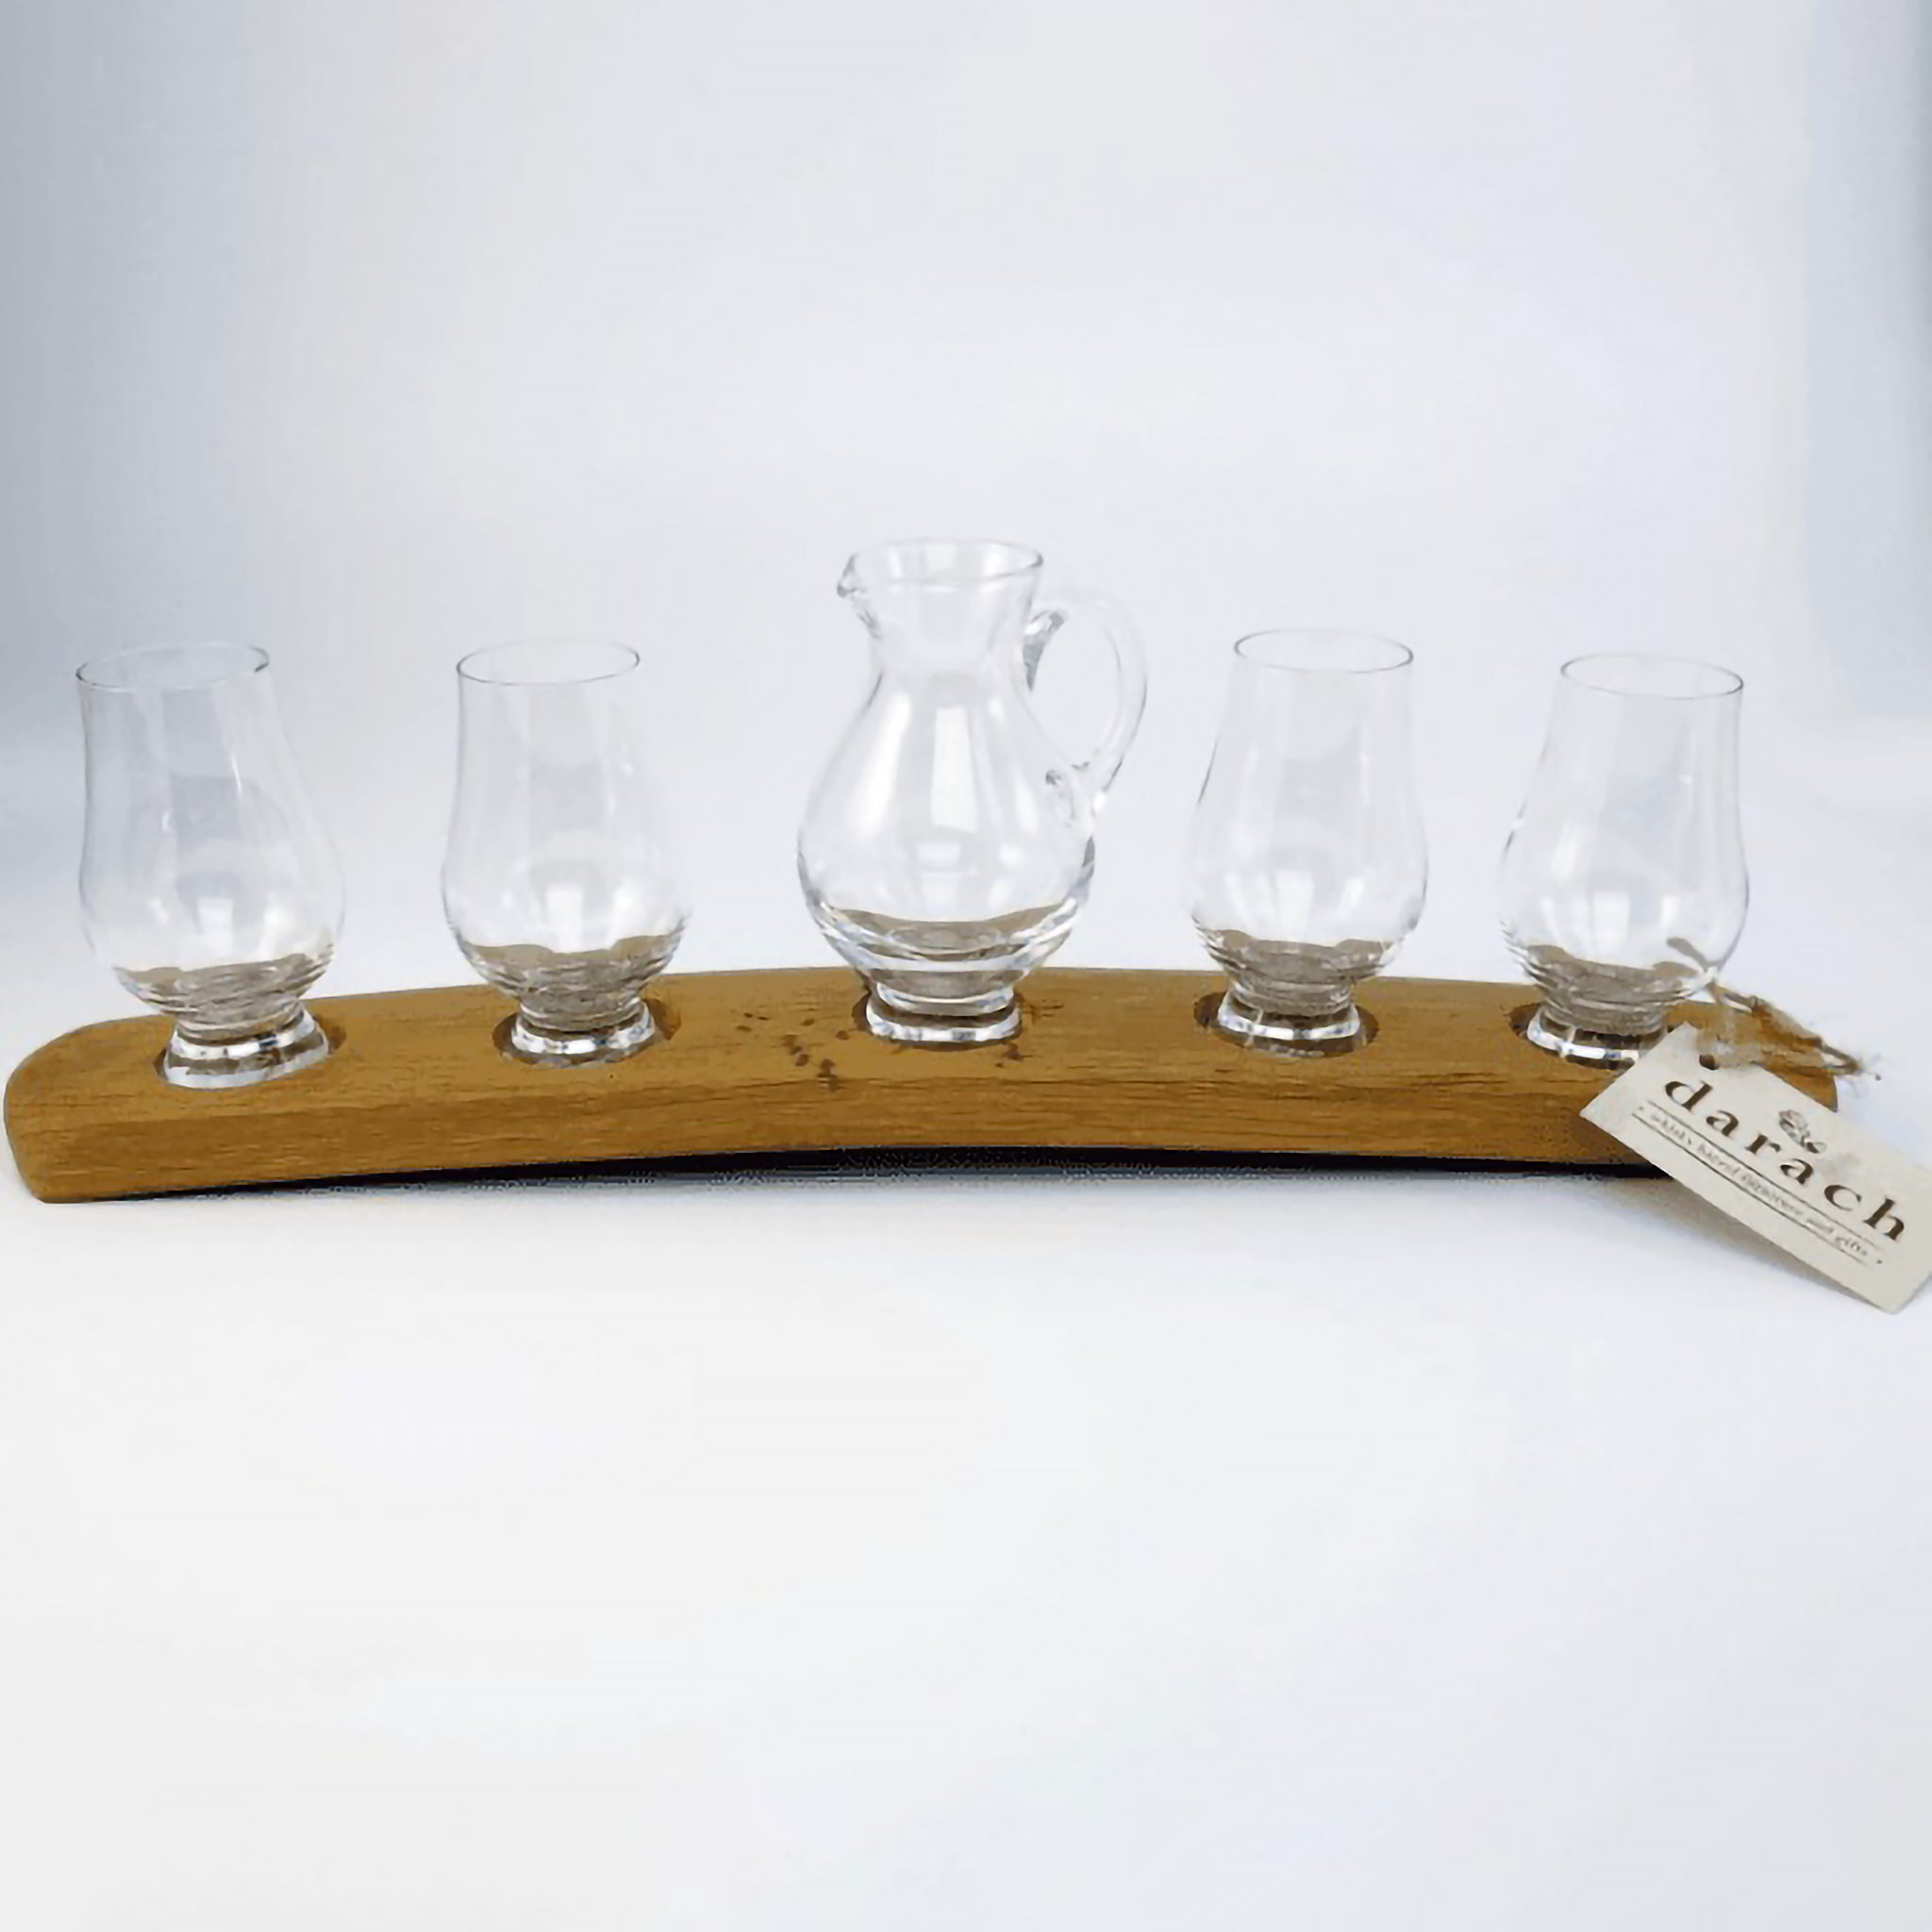 Four nosing whisky glasses and single glass jug on wooden barrel stave